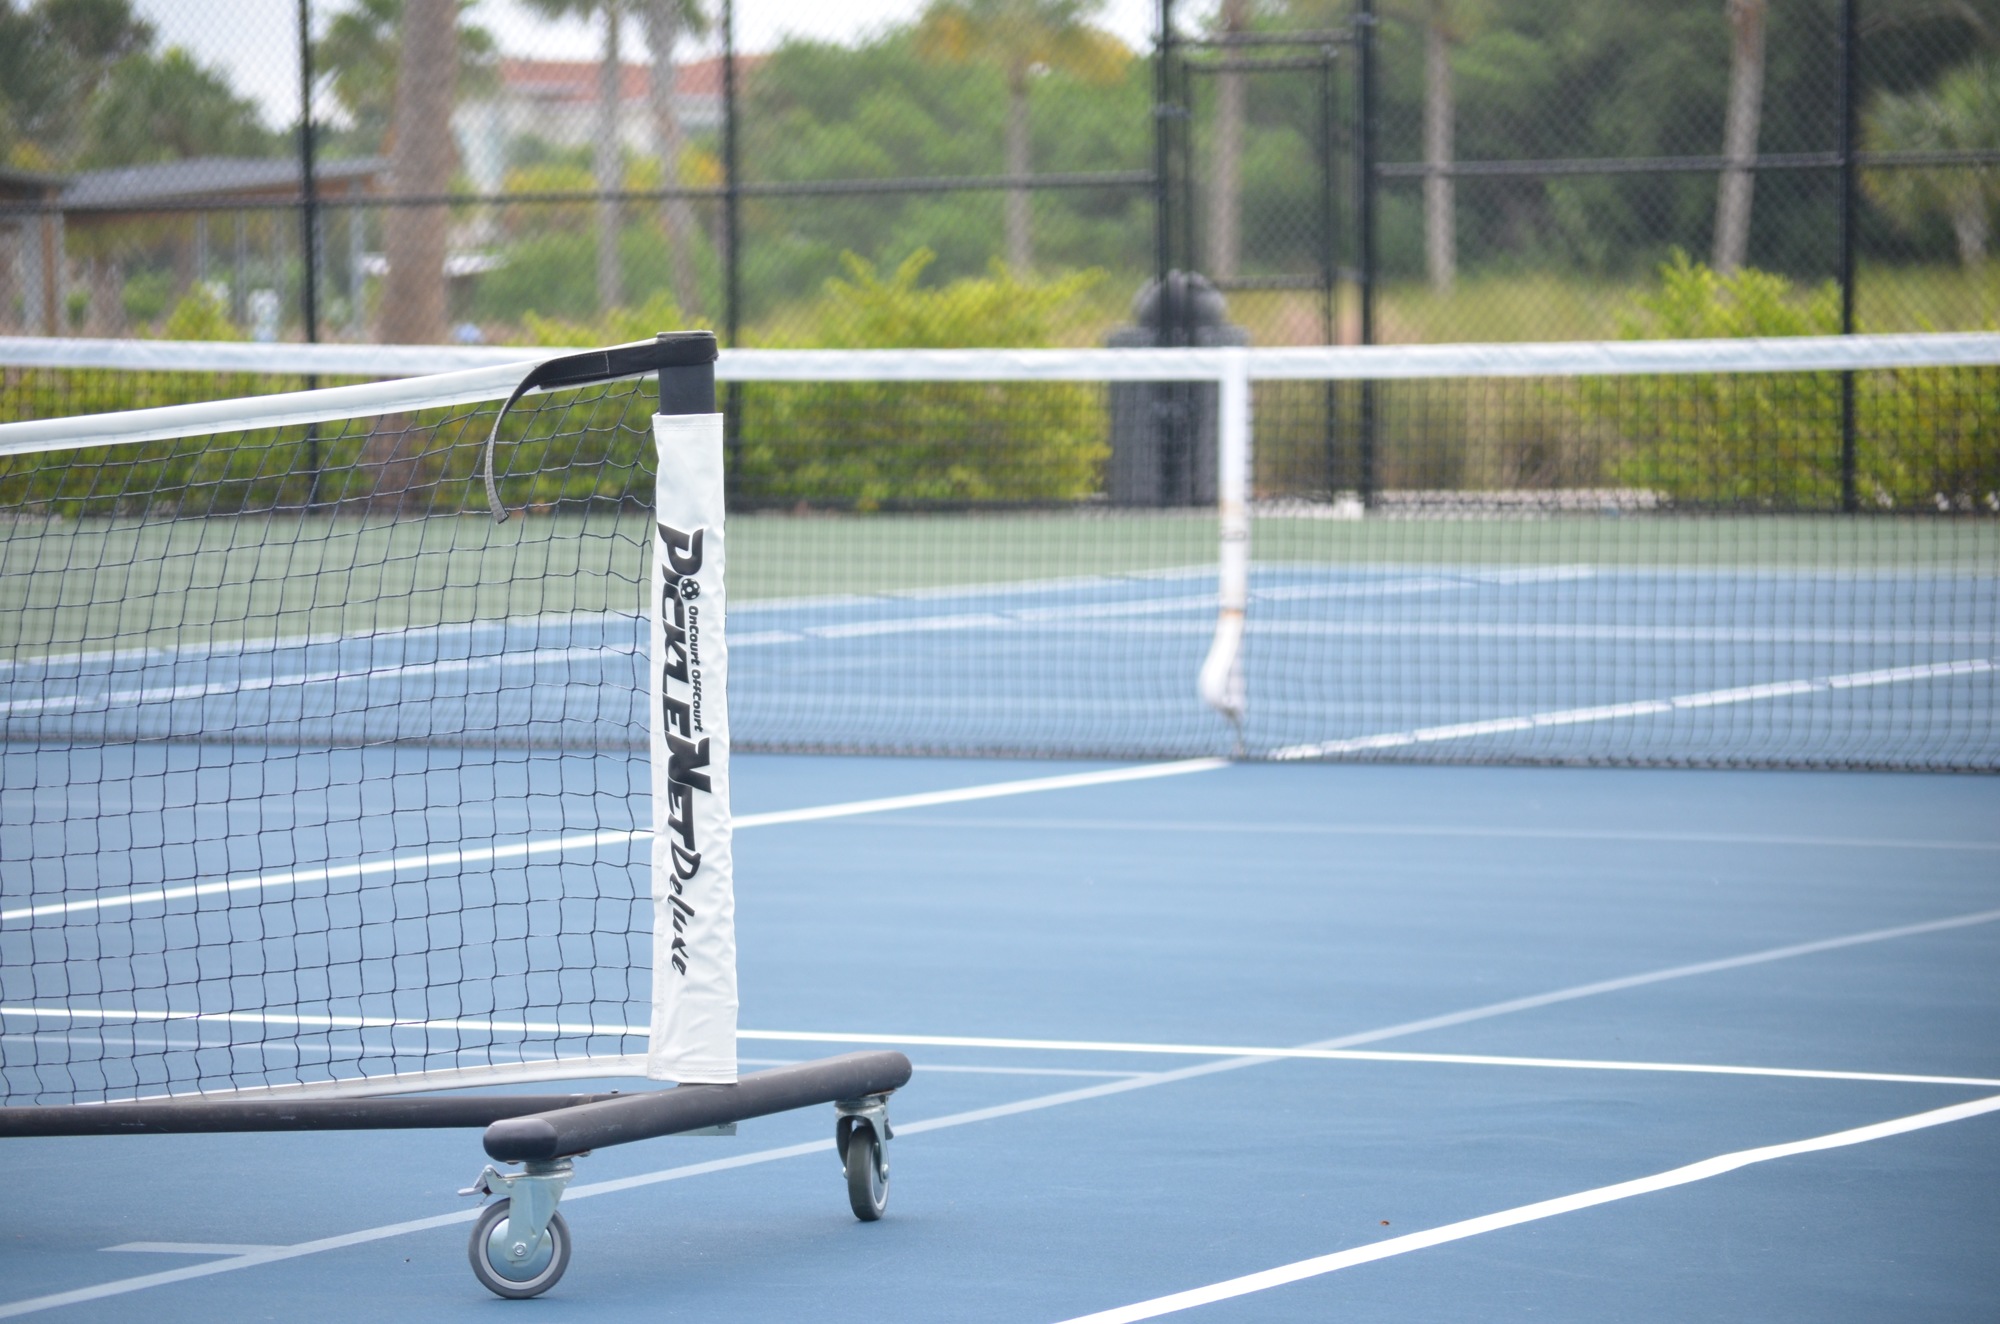 The Bayfront Park tennis courts are outfitted with additional lines and portable pickleball courts.